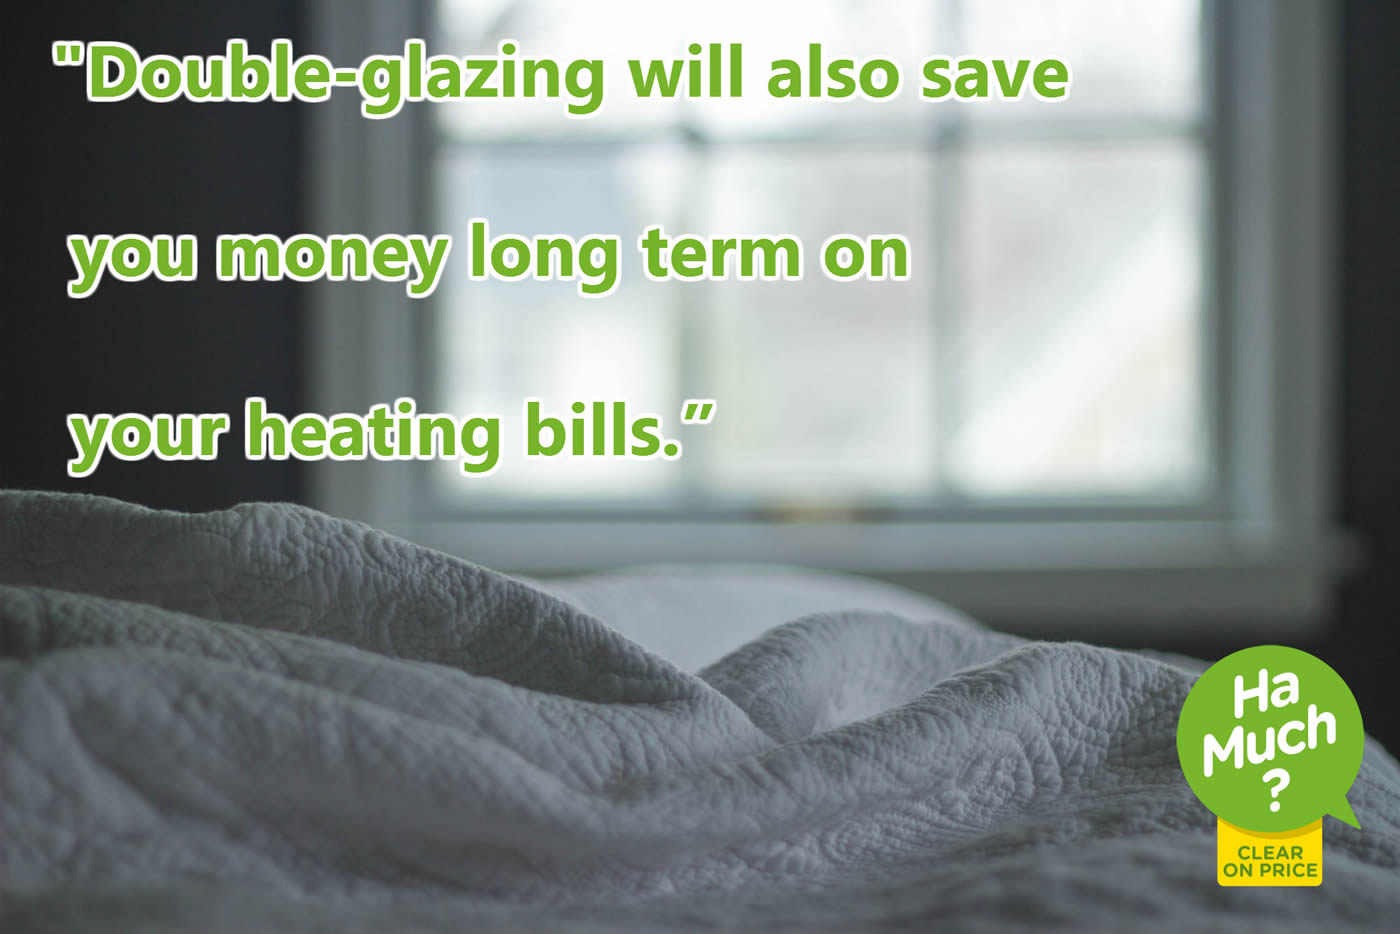 Double-glazing will also save your money long term on your heating bills